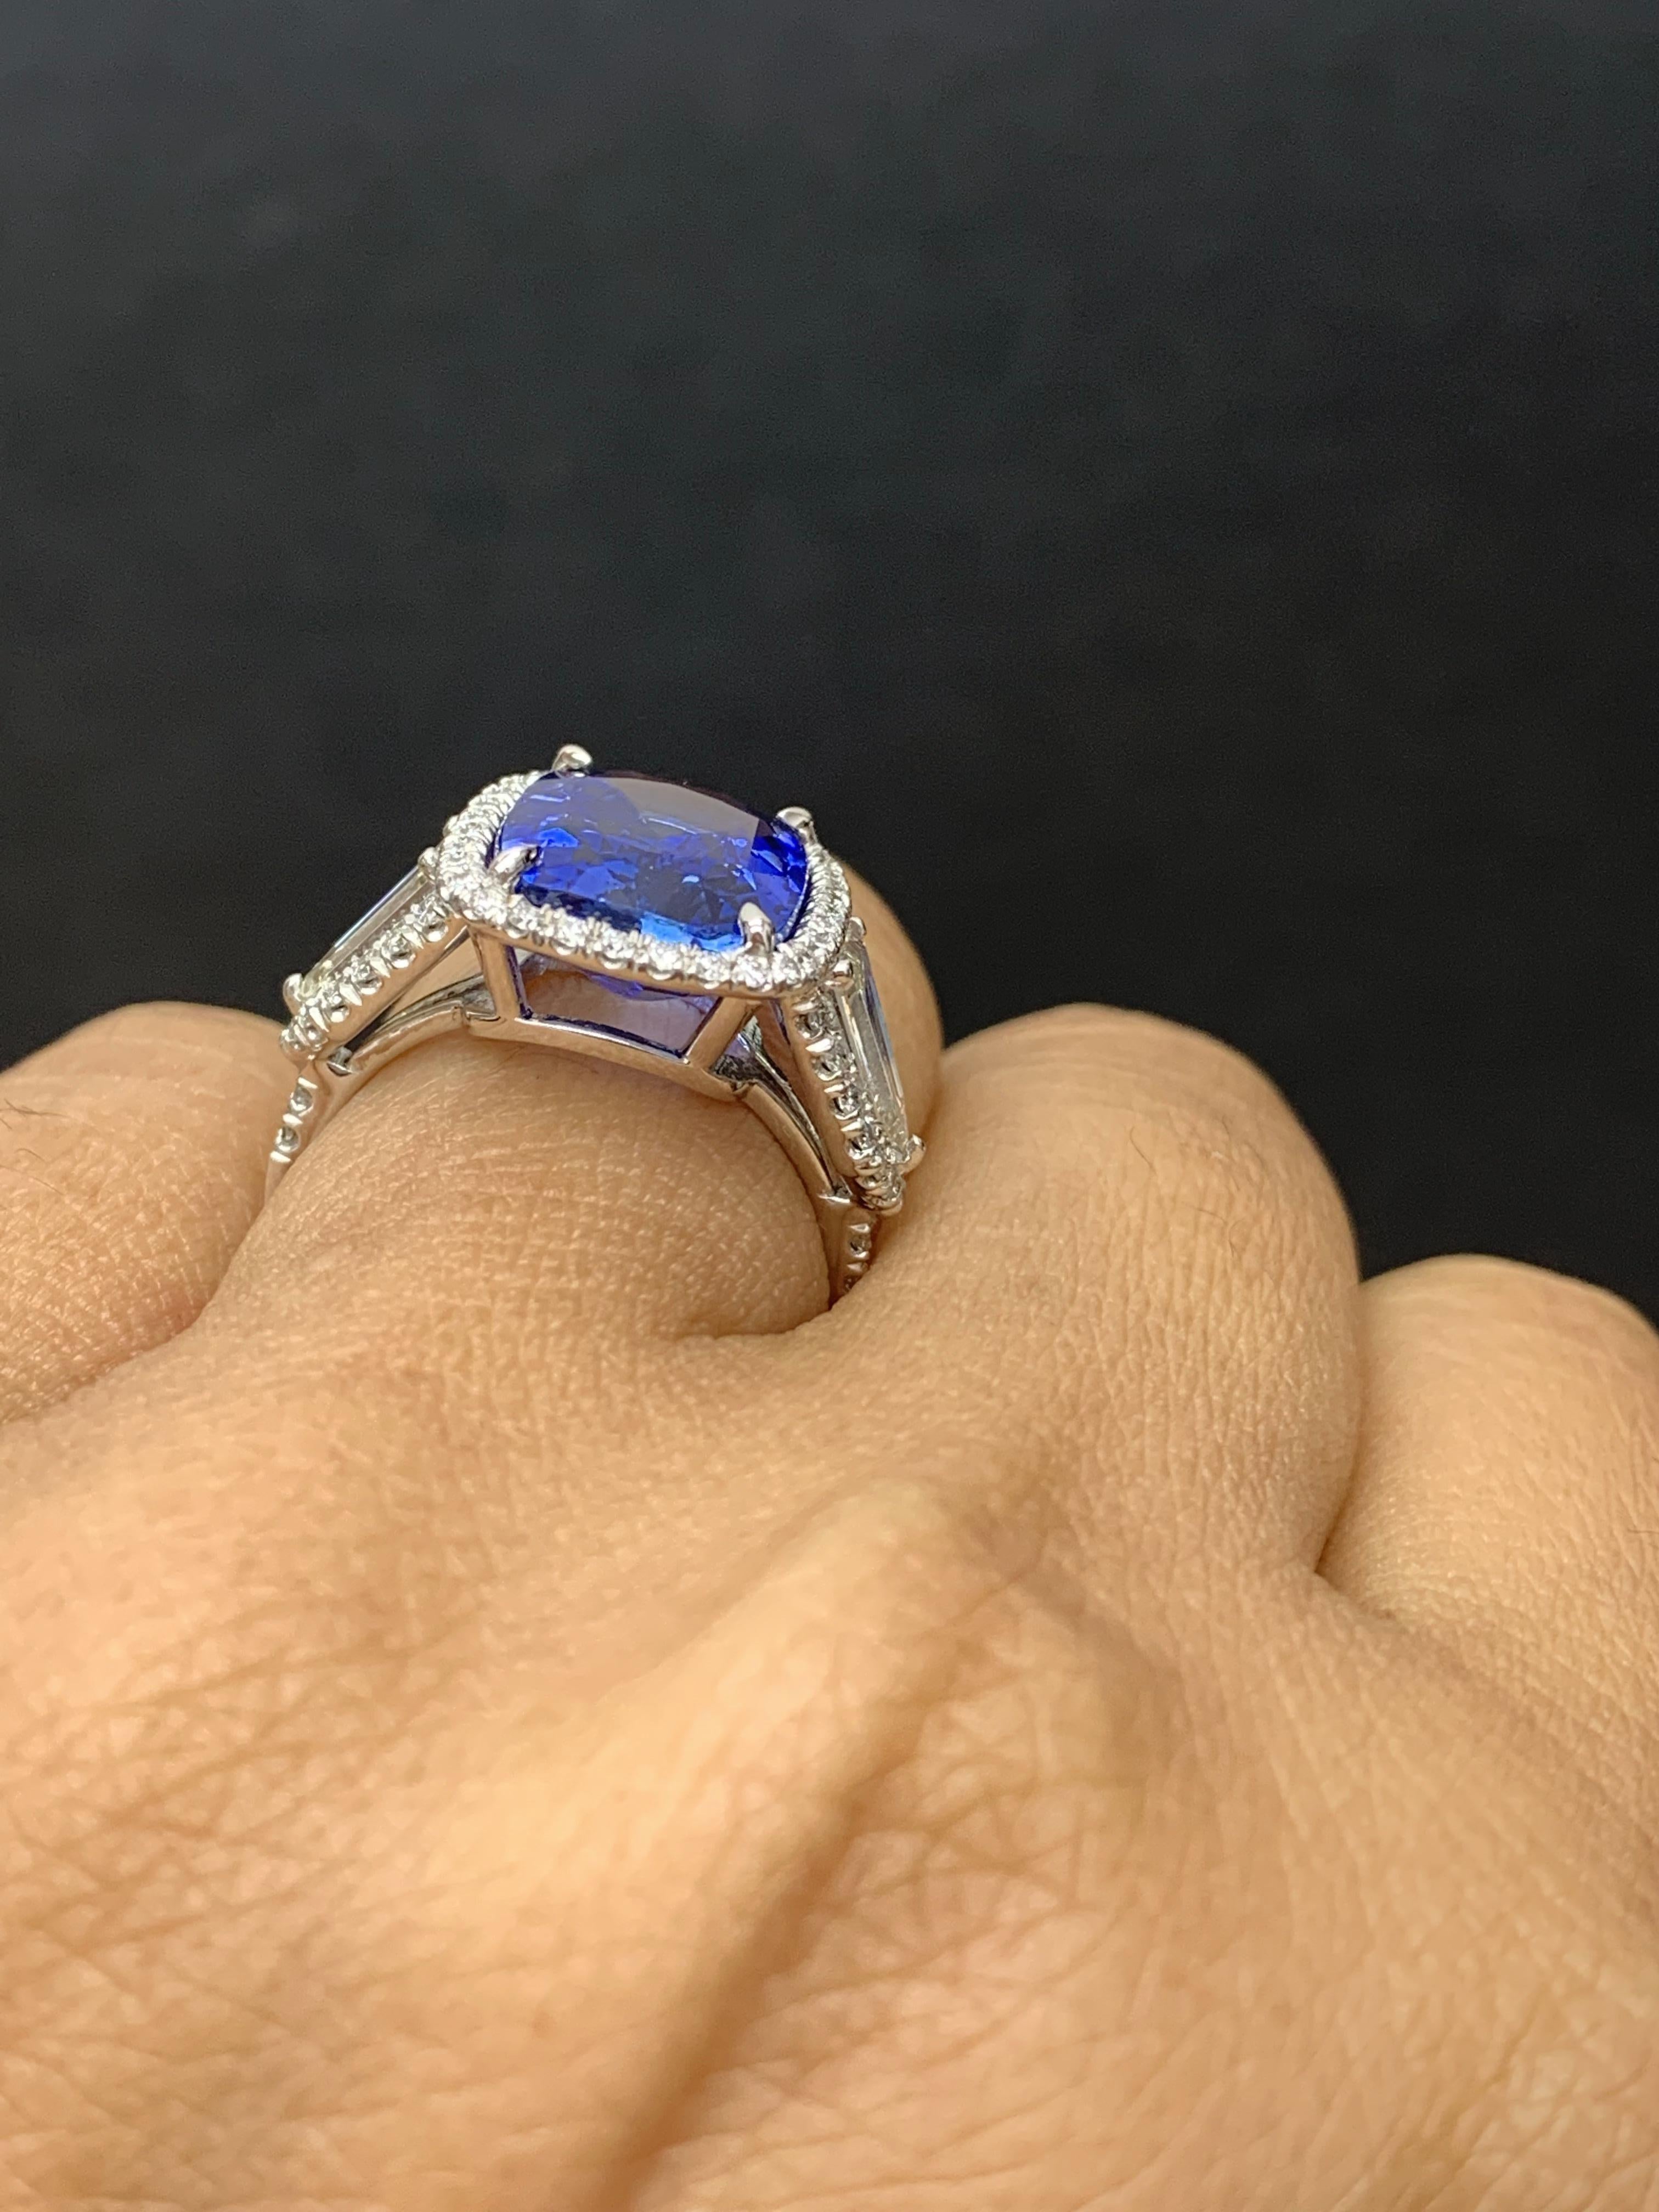 7.51 Carat Cushion Cut Sapphire and Diamond Engagement Ring in Platinum For Sale 10